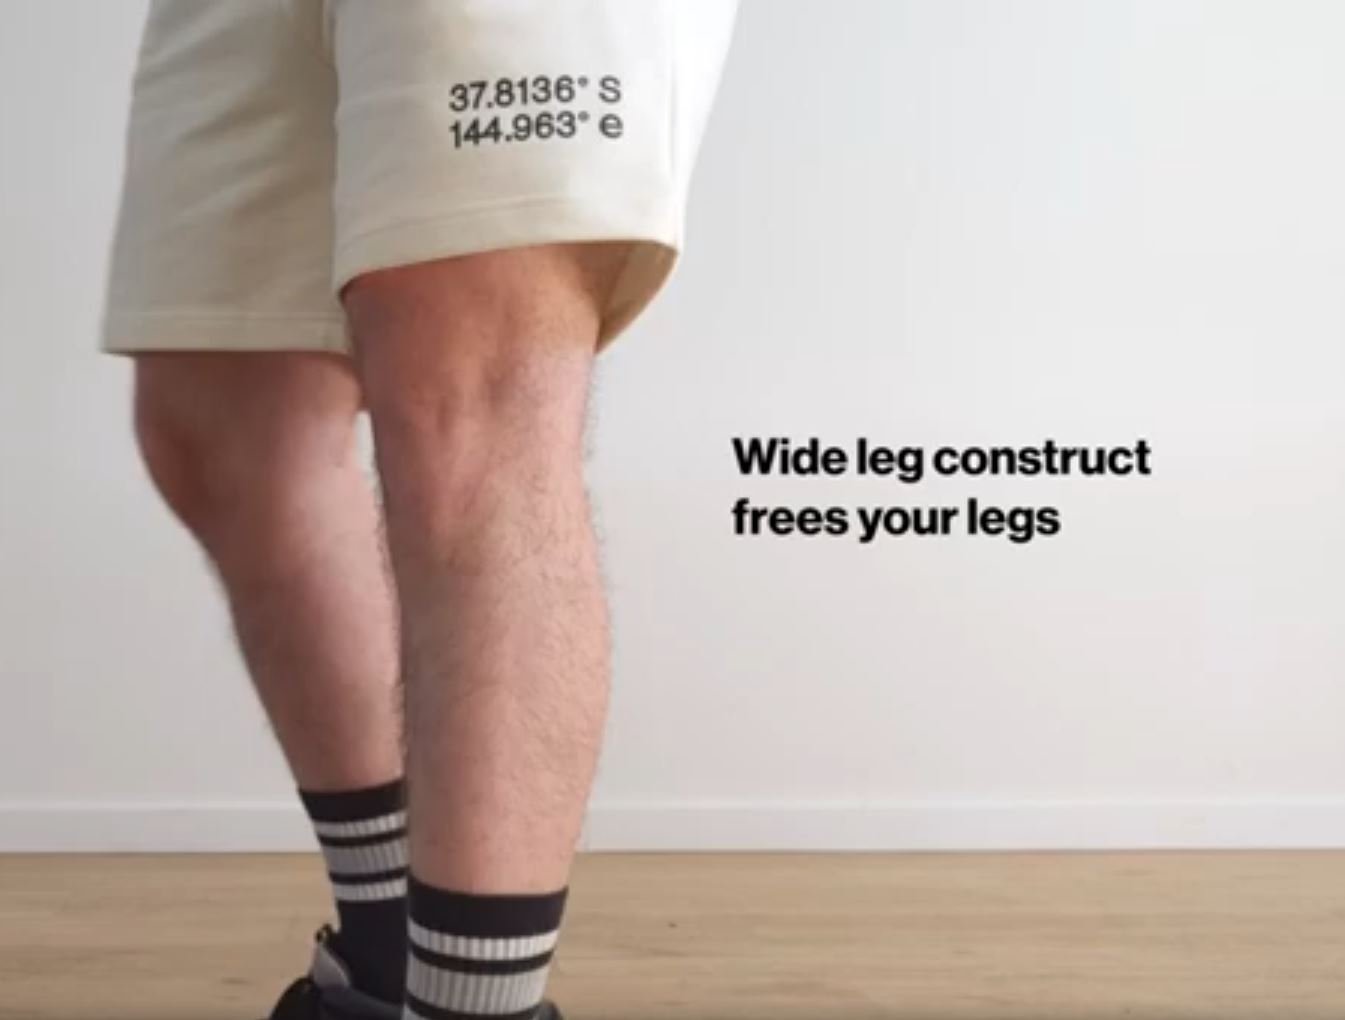 Load video: Movement Short Introduction featuring the wide leg construct and soft french terry cotton for a free flowing and strong garment